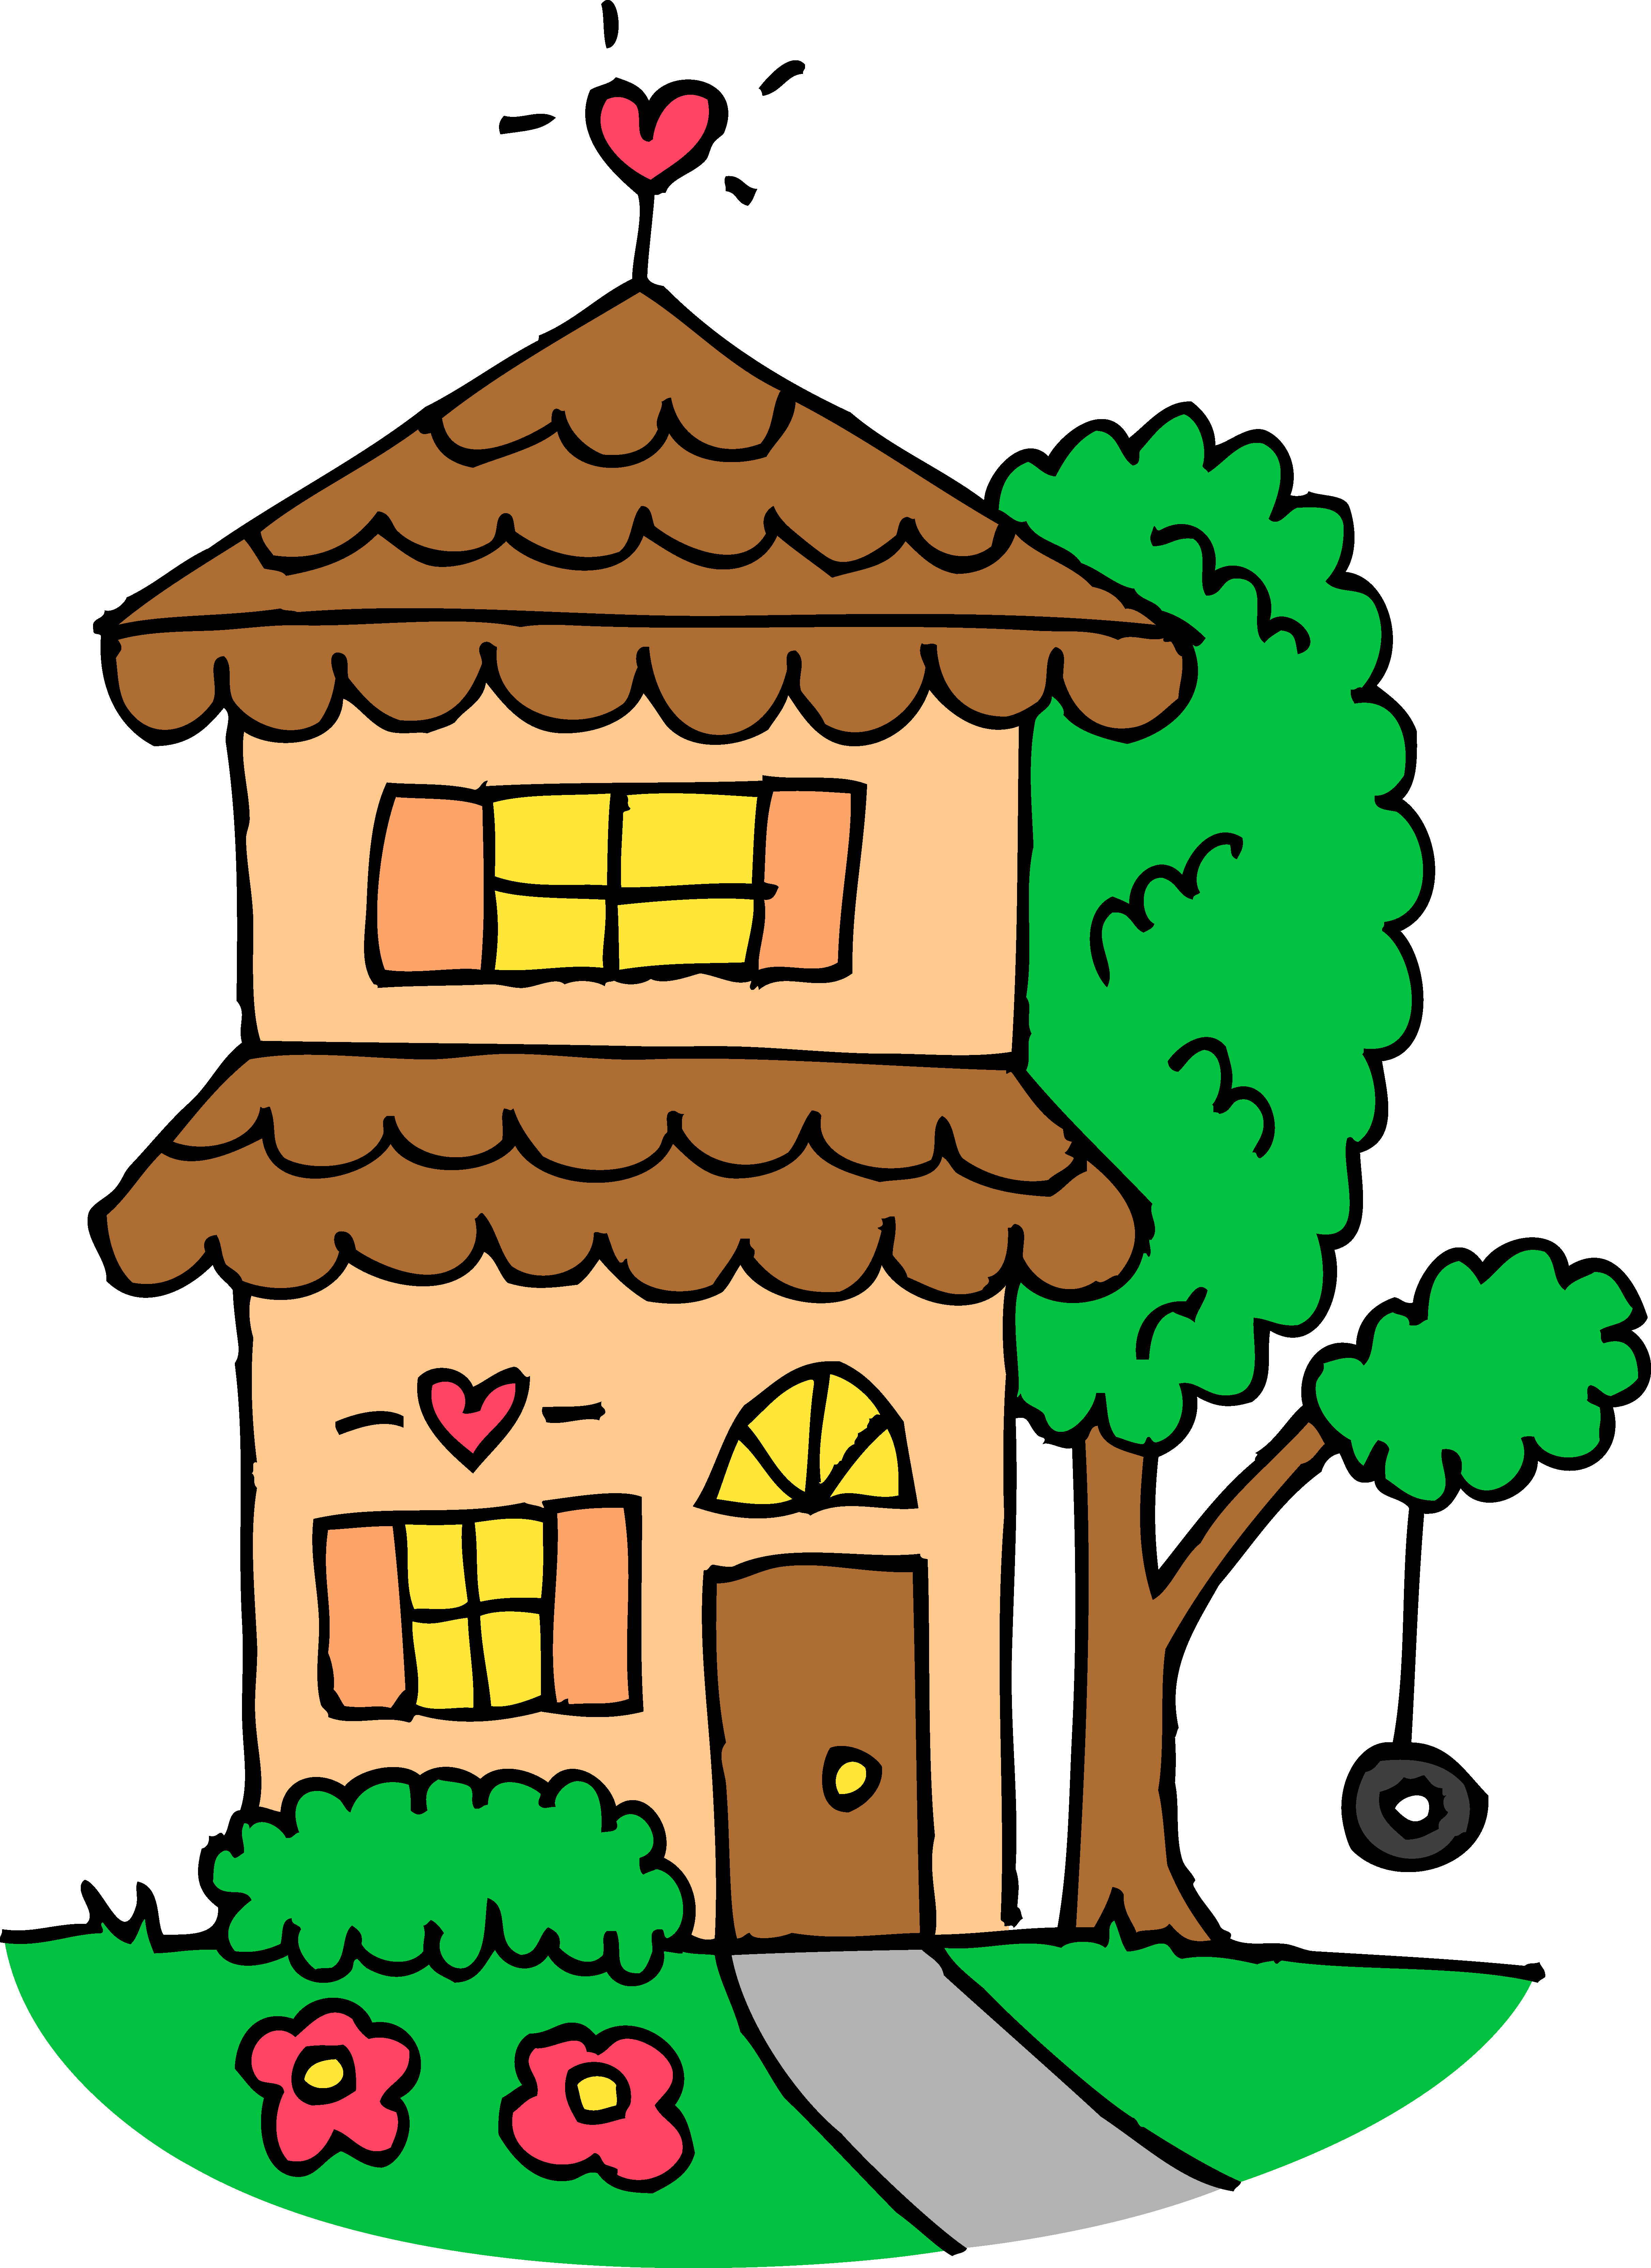 sold home clipart - photo #21